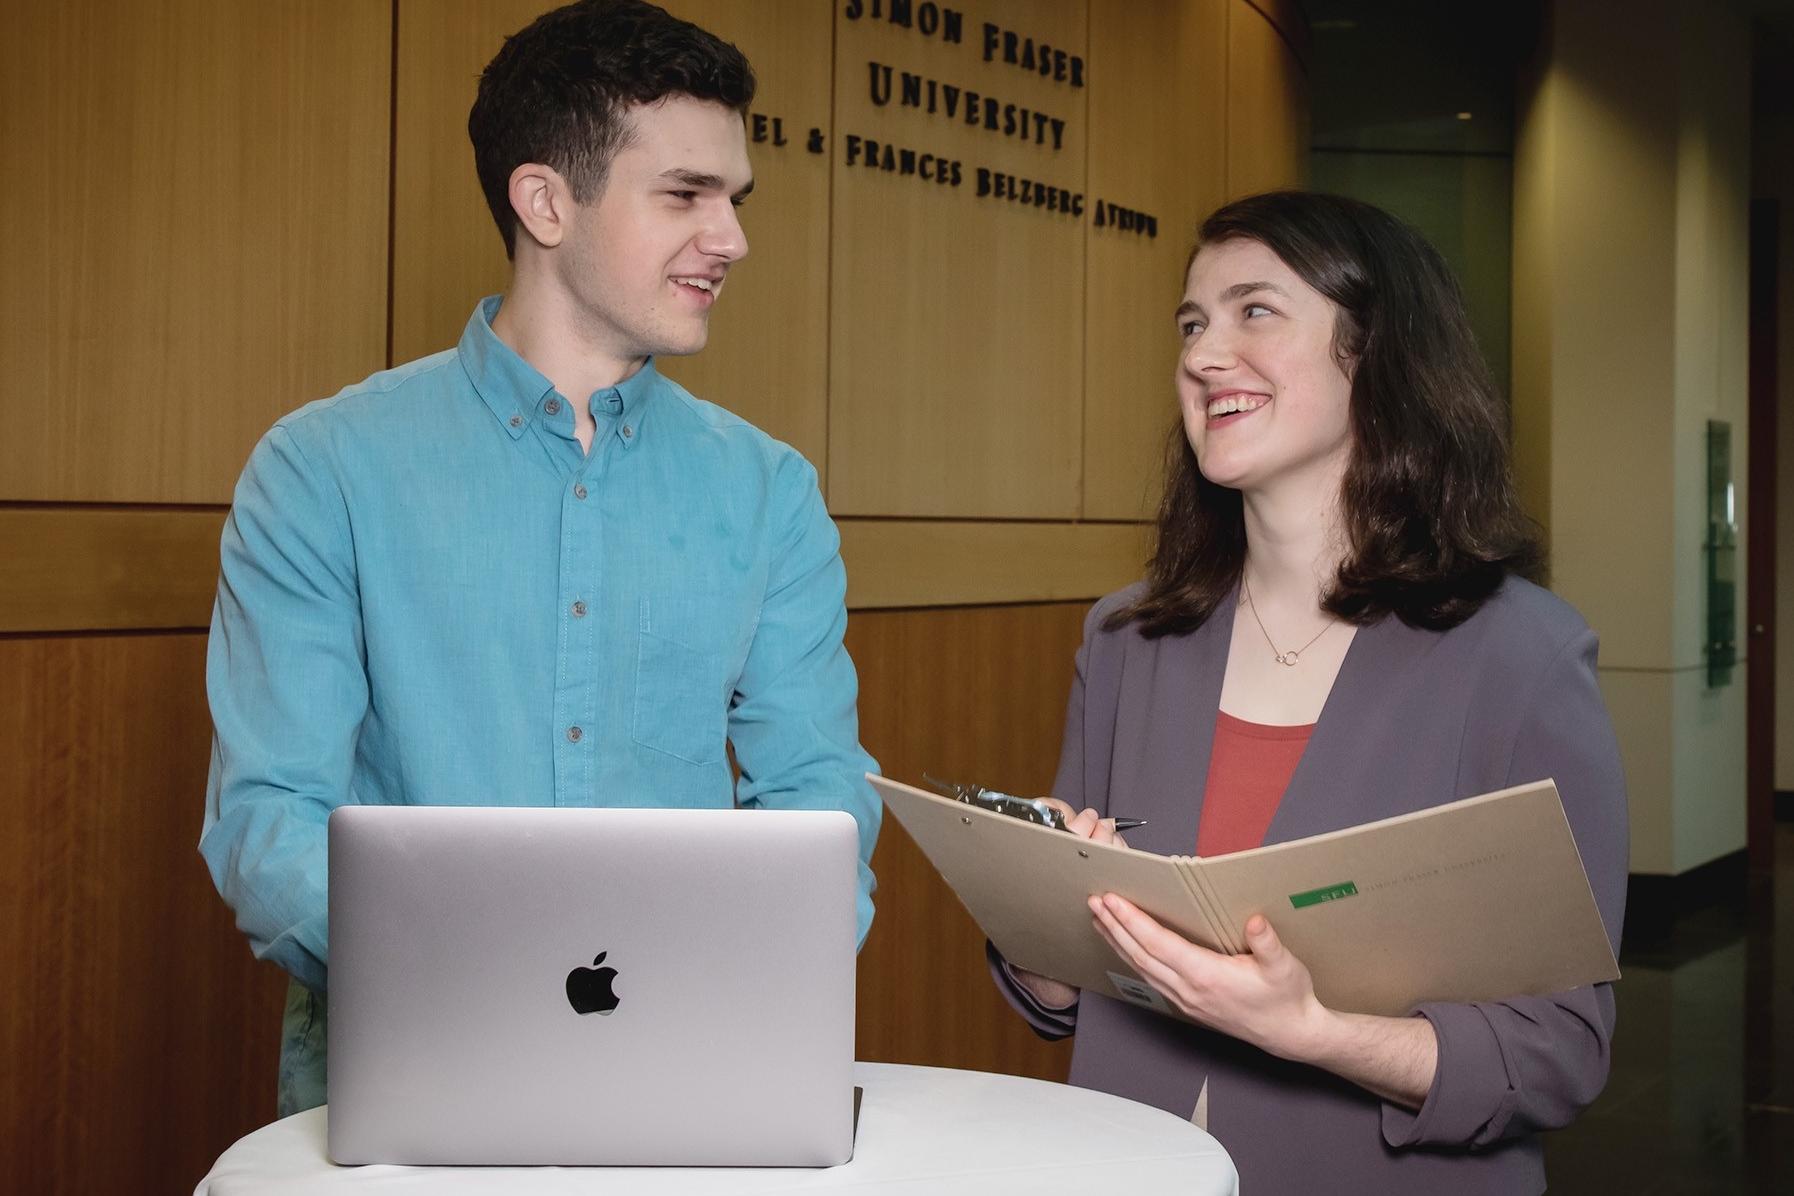 two undergraduate students smile at each other, one with an open laptop and another holding an open binder